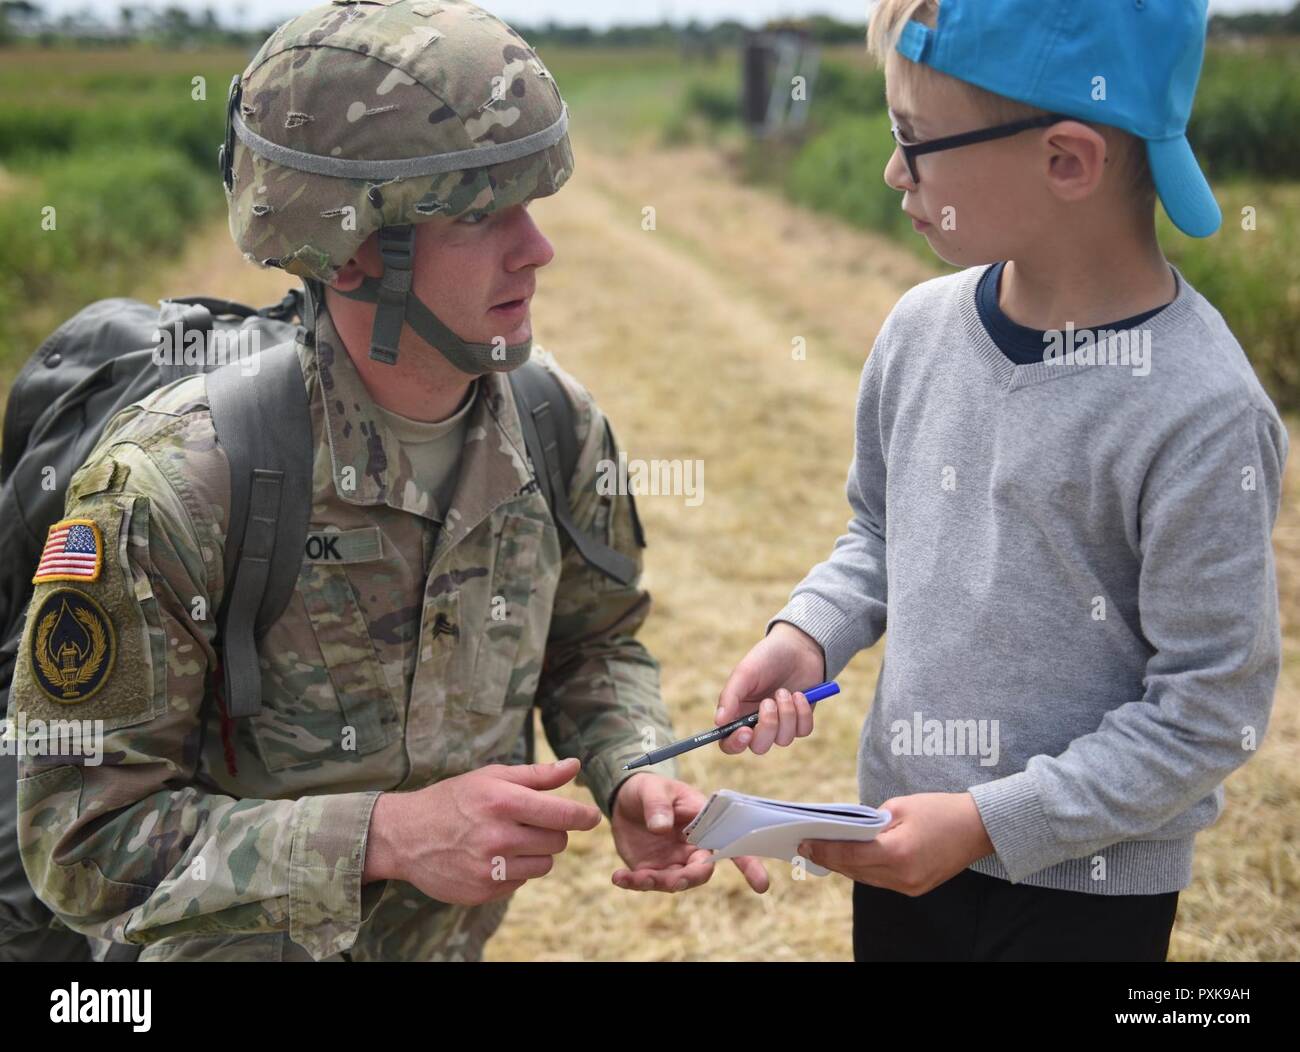 A U.S. Army Paratrooper from the 173rd Airborne Brigade signs an autograph book for a young French boy following the commemorative airborne operation on Iron Mike Drop Zone II in Normandy, France. Paratroopers from across the armed forces and NATO jumped into Normandy to commemorate the 73rd anniversary of Operation Overlord, also known as D-Day. The 173rd Airborne Brigade (Sky Soldiers) is the U.S. Army's Contingency Response Force in Europe, providing rapid forces to the United States European, Africa and Central Commands areas of responsibilities. Forward-based in Italy and Germany along wi Stock Photo